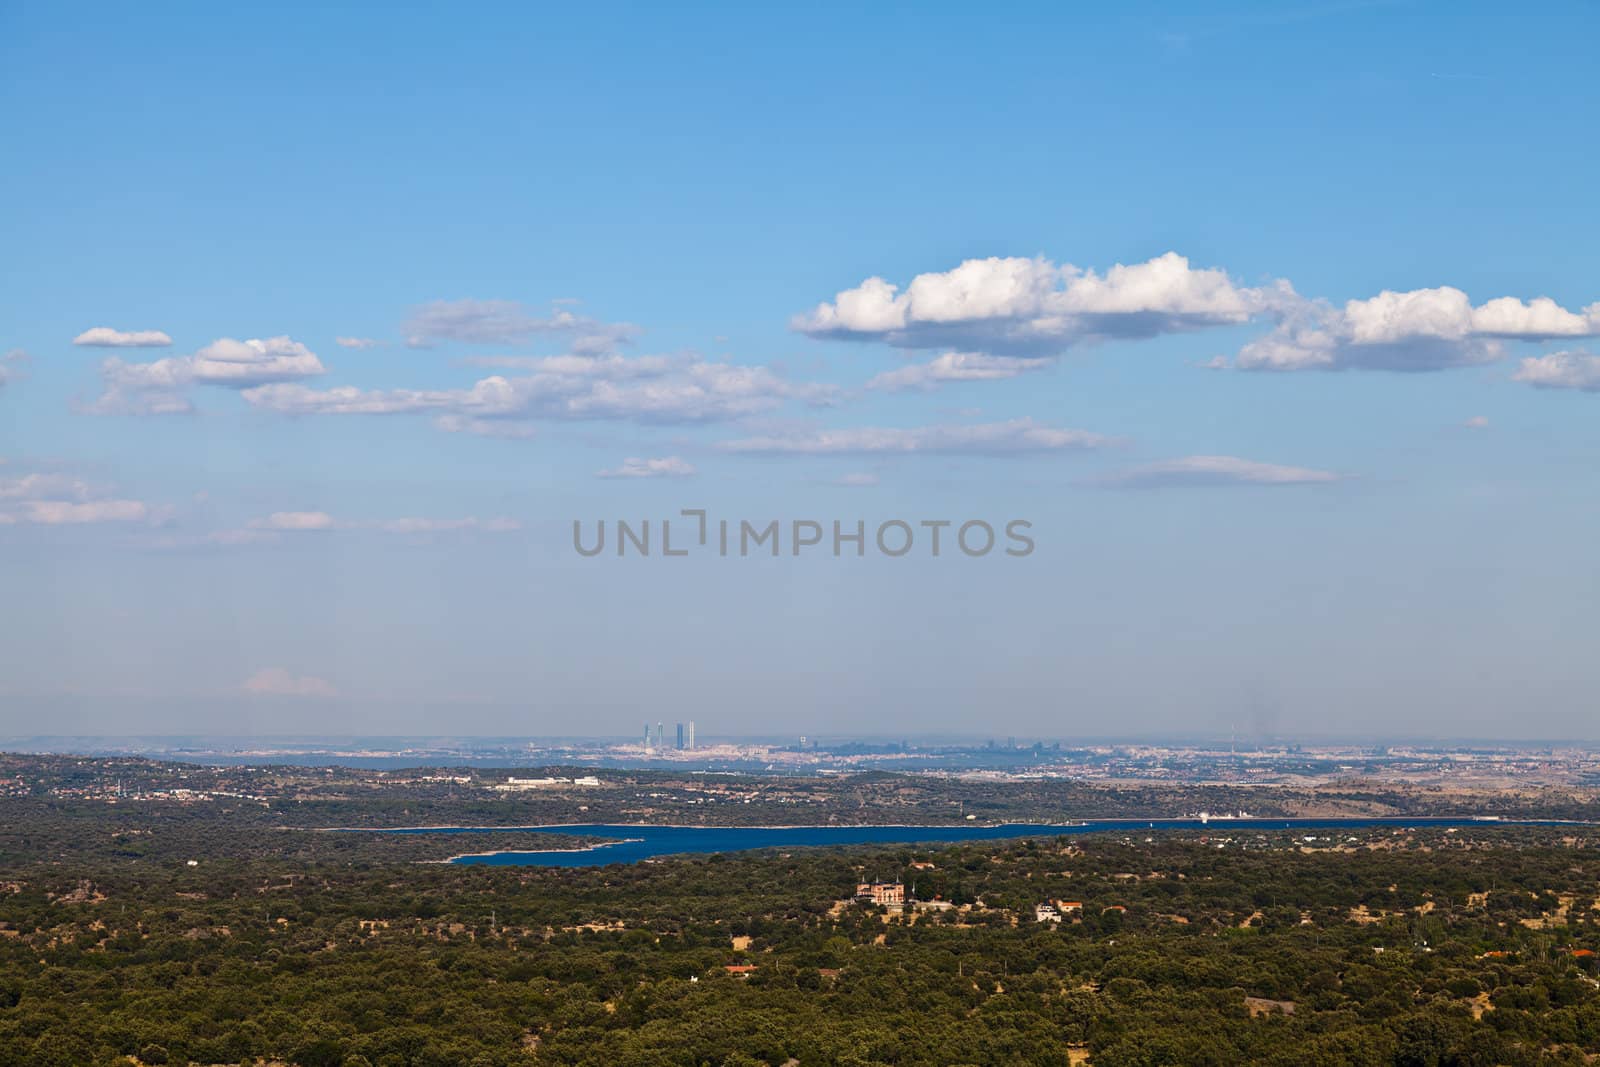 View of the city of Madrid from a distance. Bright blue lake in the foreground. Taken on a sunny day with bright blue sky and a few white clouds.